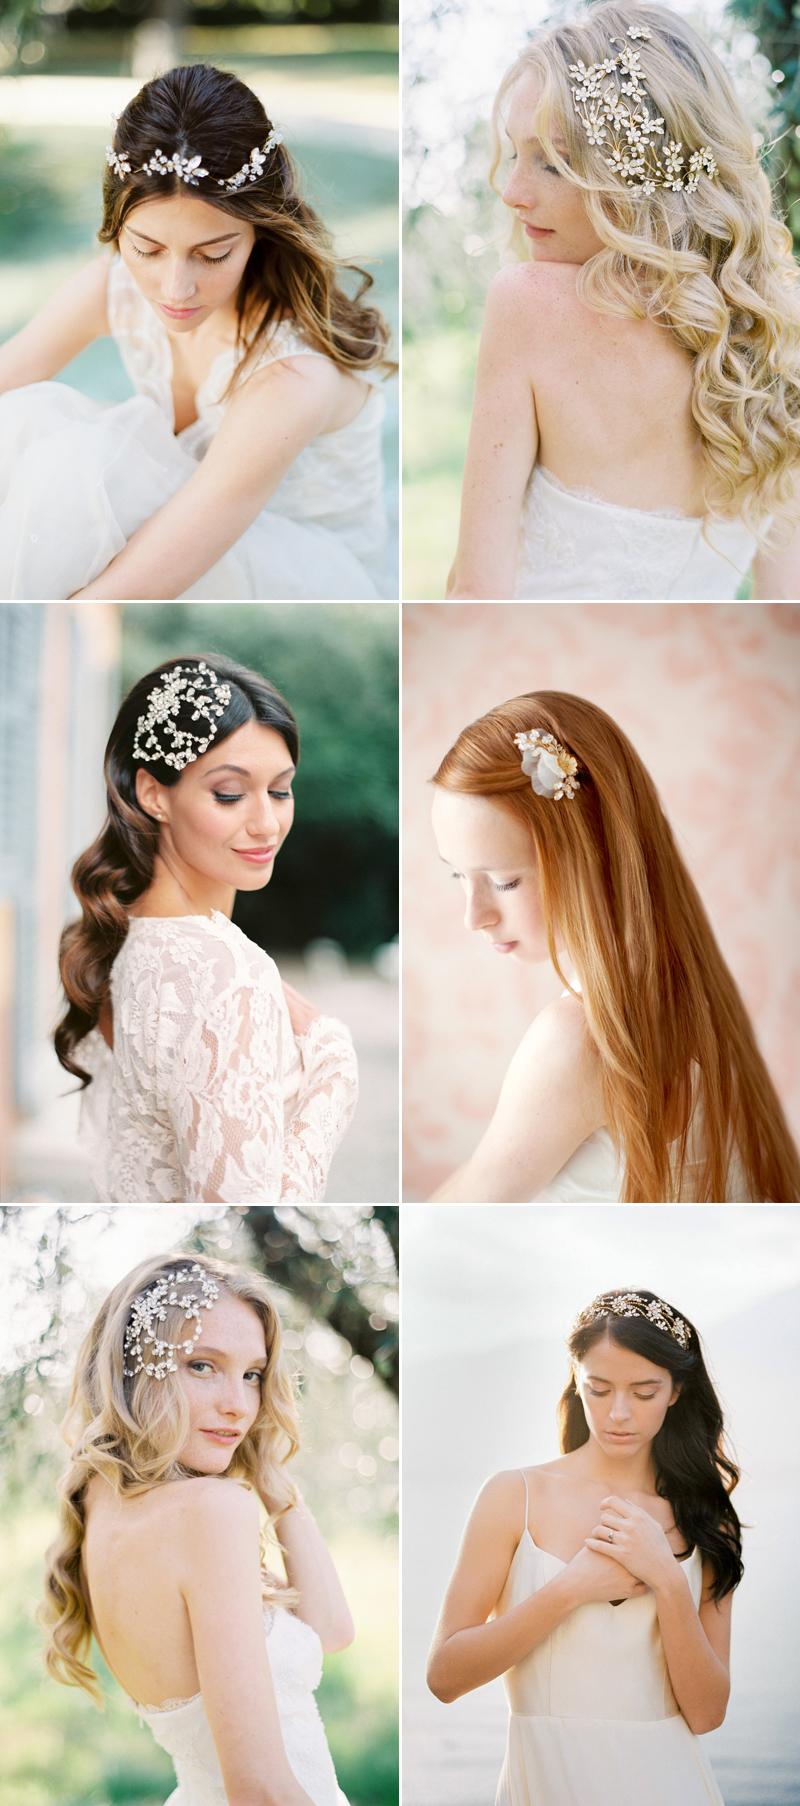 How To Wear Your Hair Down For Your Wedding? 30 Chic Hair Accessories To Style  Free-Flowing Long Hair! - Praise Wedding